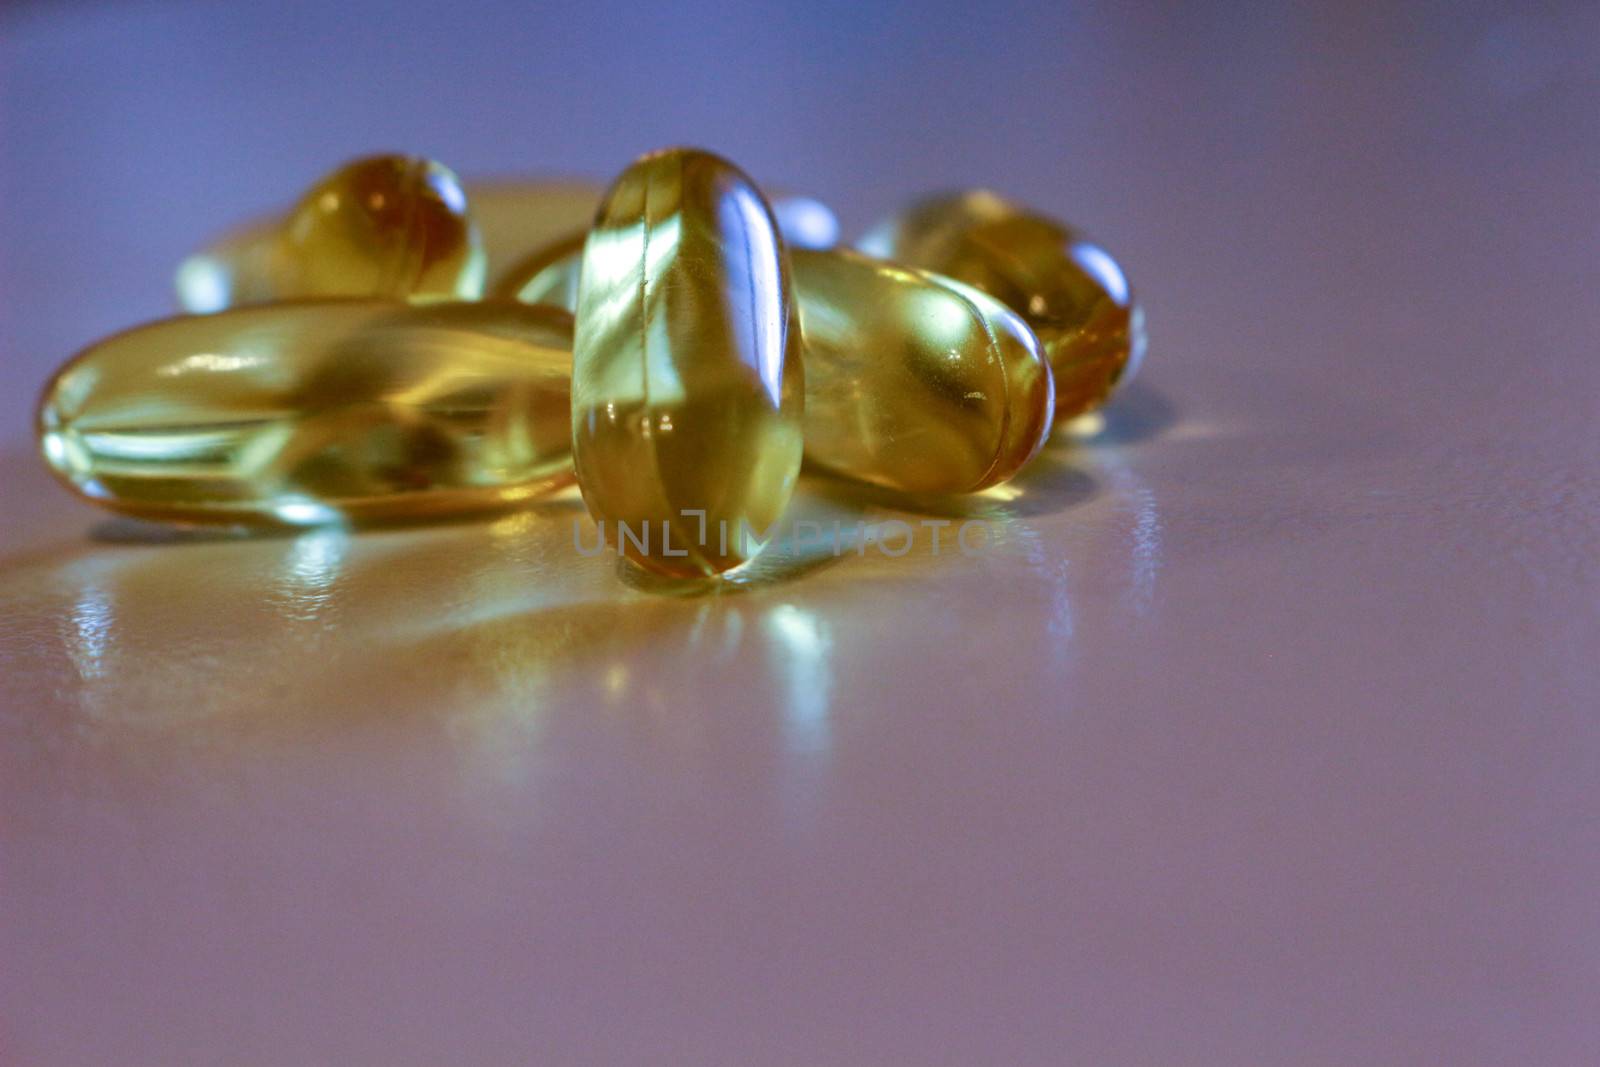 Close up yellow Cod Liver Oil capsule on white background, fish by mynewturtle1